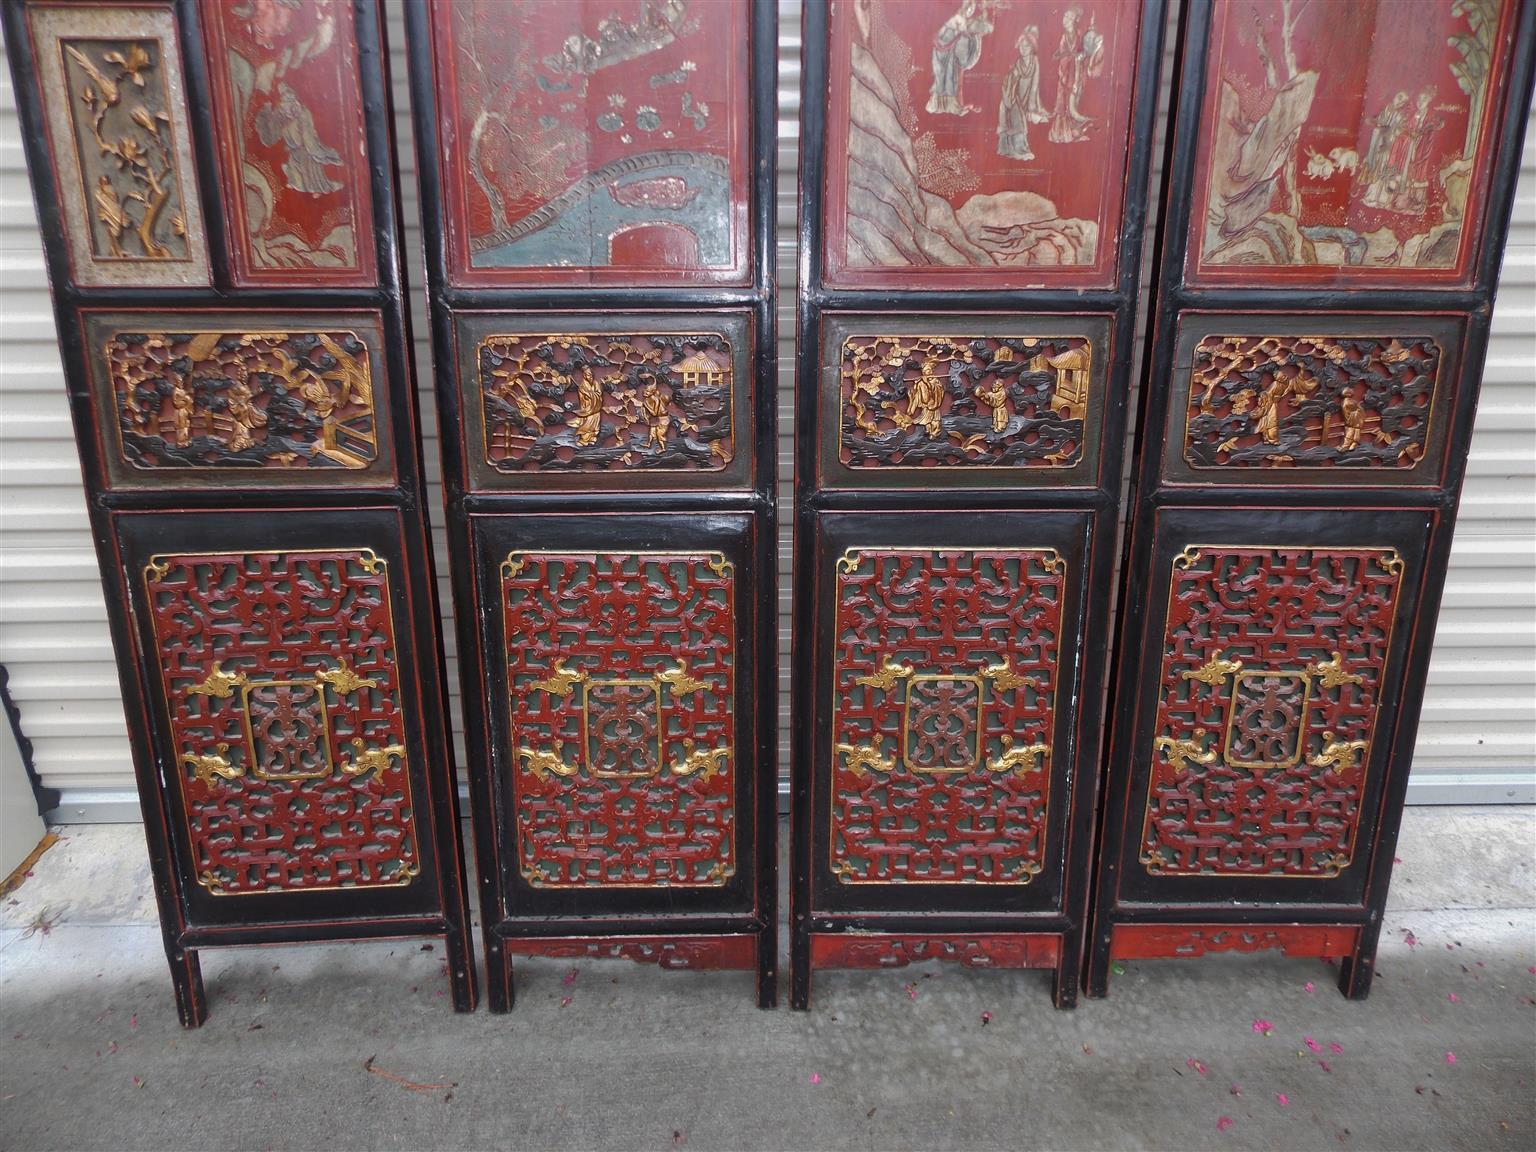 Hand-Carved Chinese Coromandel Red Lacquer 12-Panel Figural and Landscape Screen. Circa 1840 For Sale